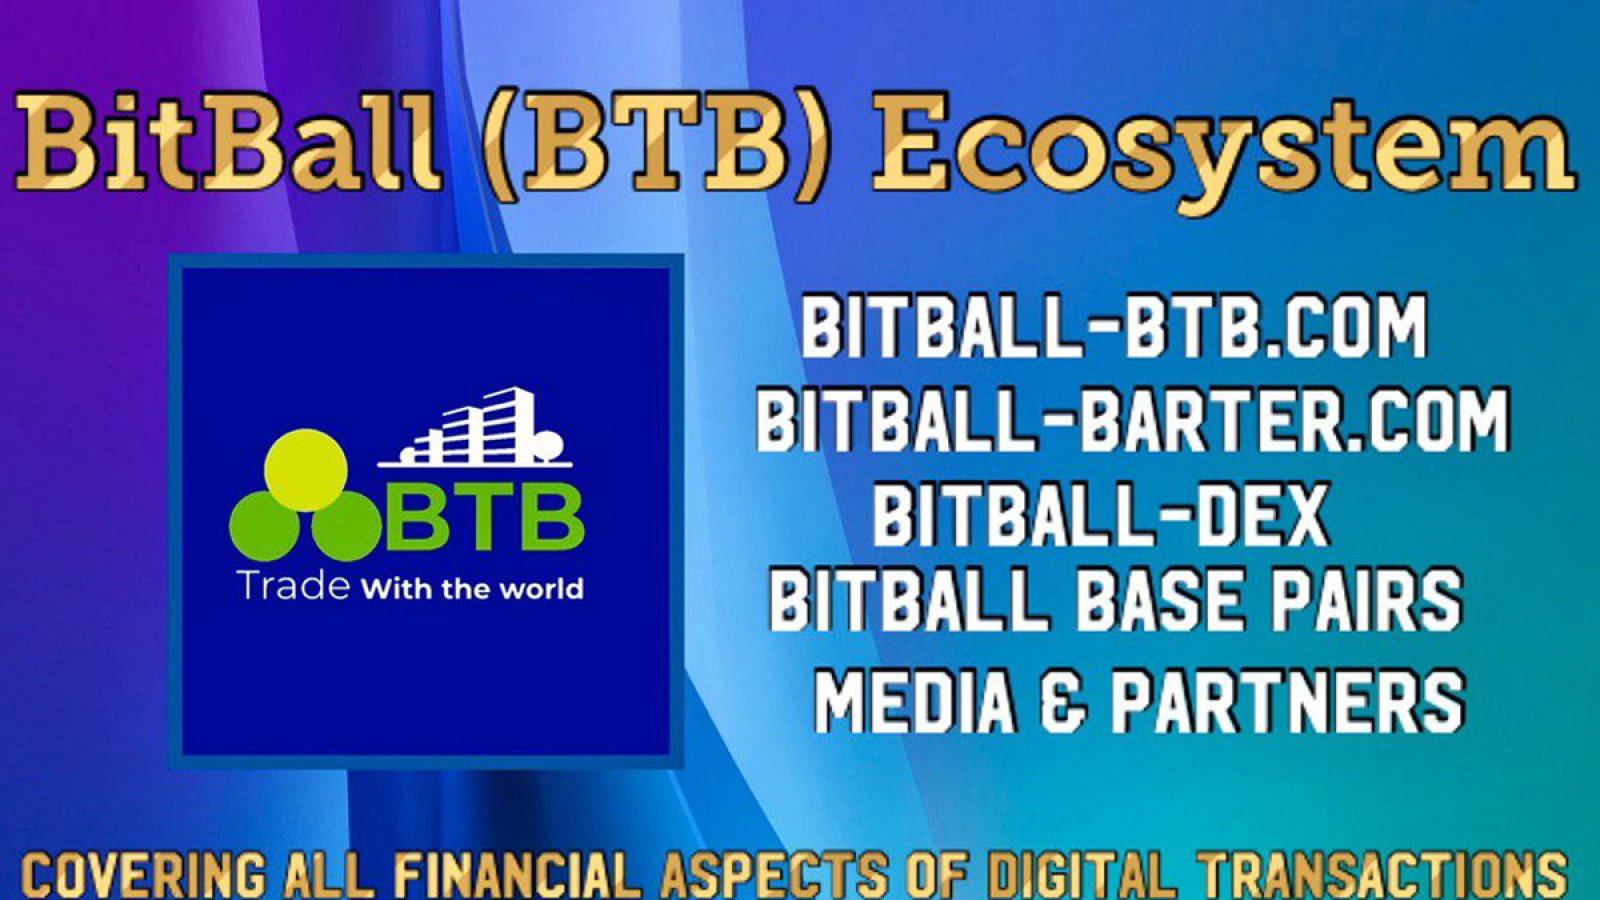 BitBall Ecosystem - All in One Cryptocurrency Covering All Aspects of Financial Transactions via BTB Build on Ethereum Blockchain